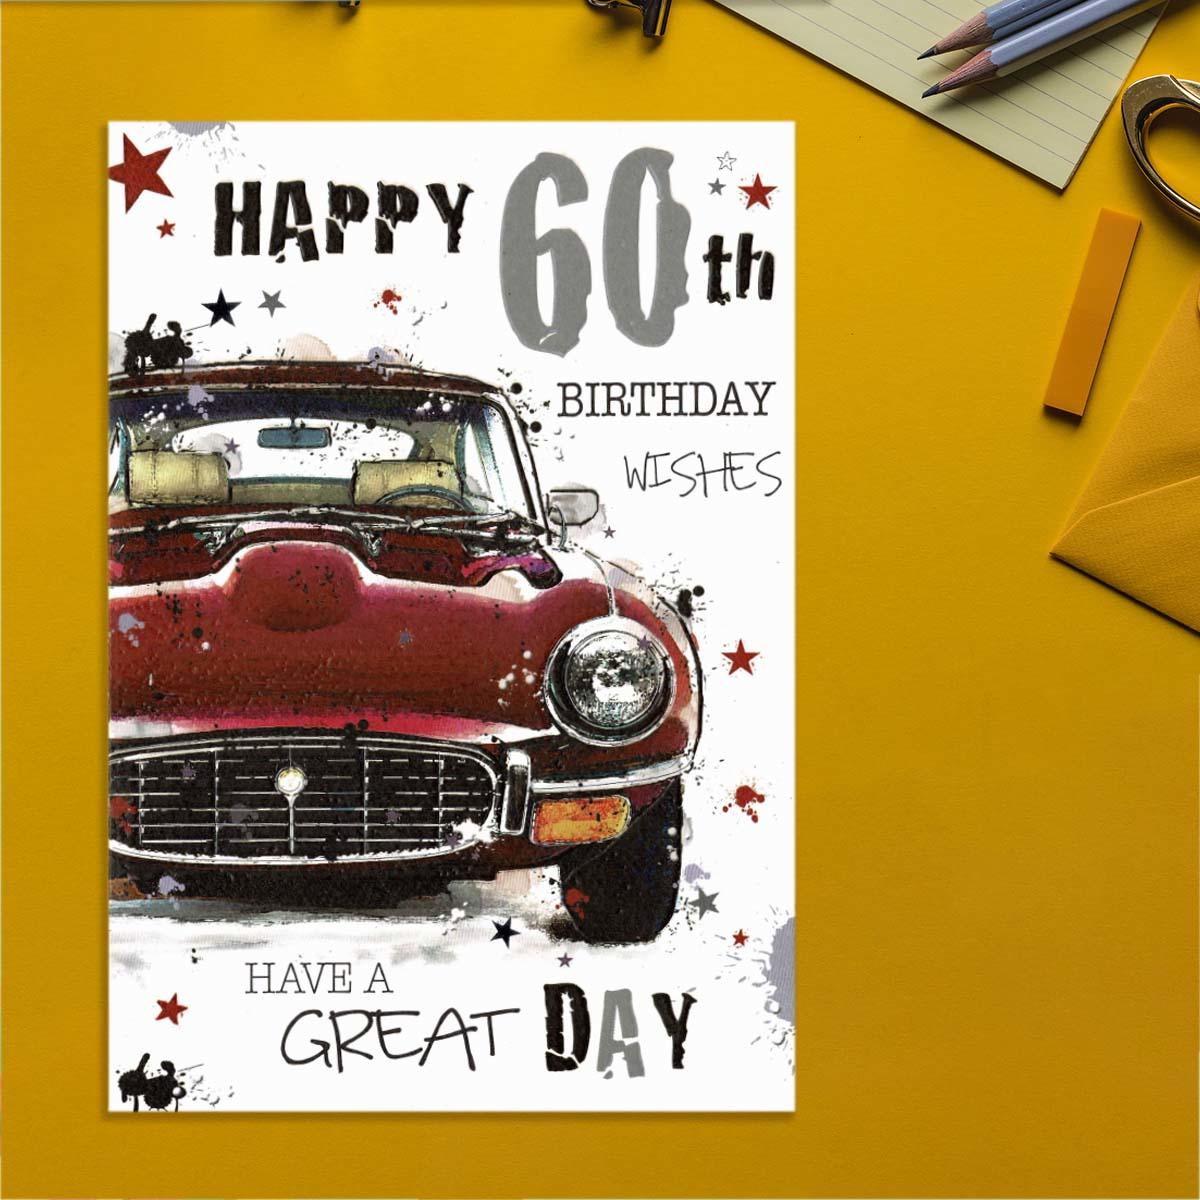 Graffix - 60th Birthday Wishes Card Front Image